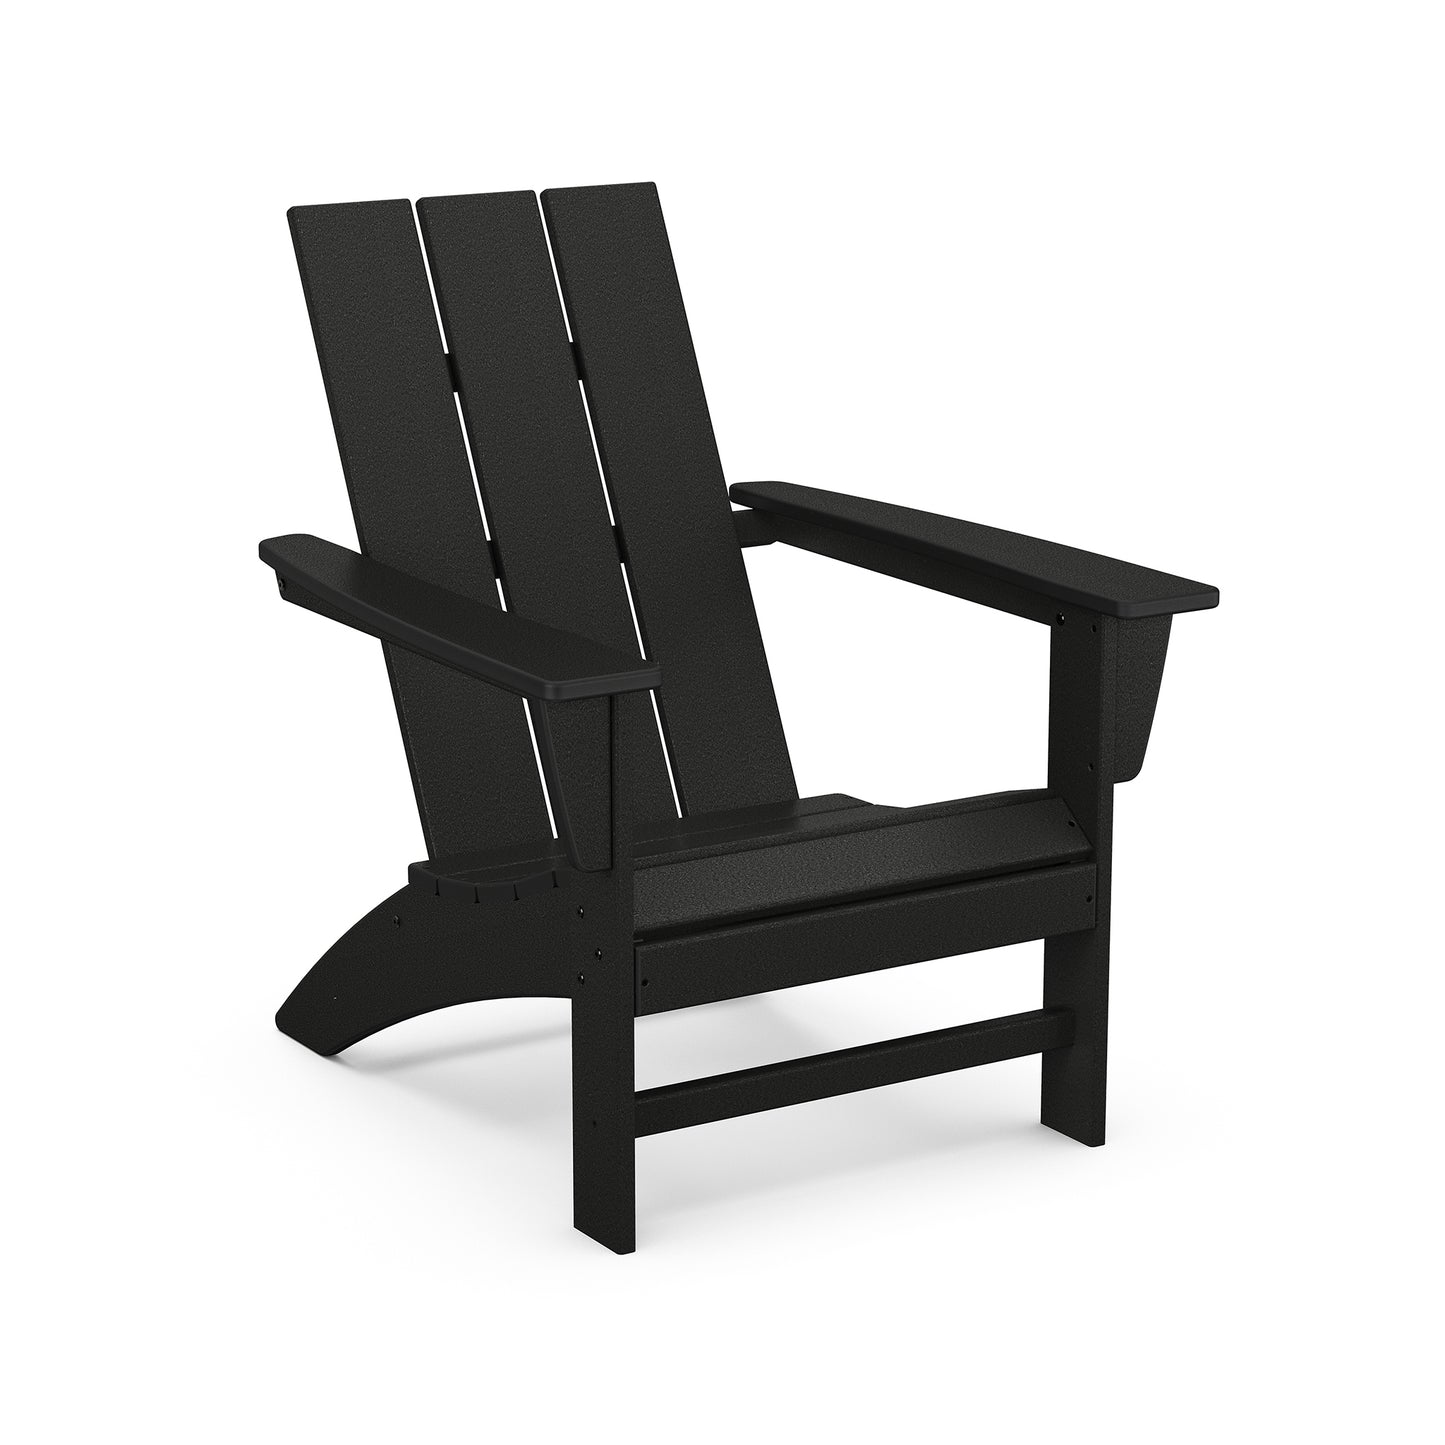 Black POLYWOOD Modern Adirondack chair made of POLYWOOD® lumber, featuring a slatted design with wide armrests, shown on a white background.